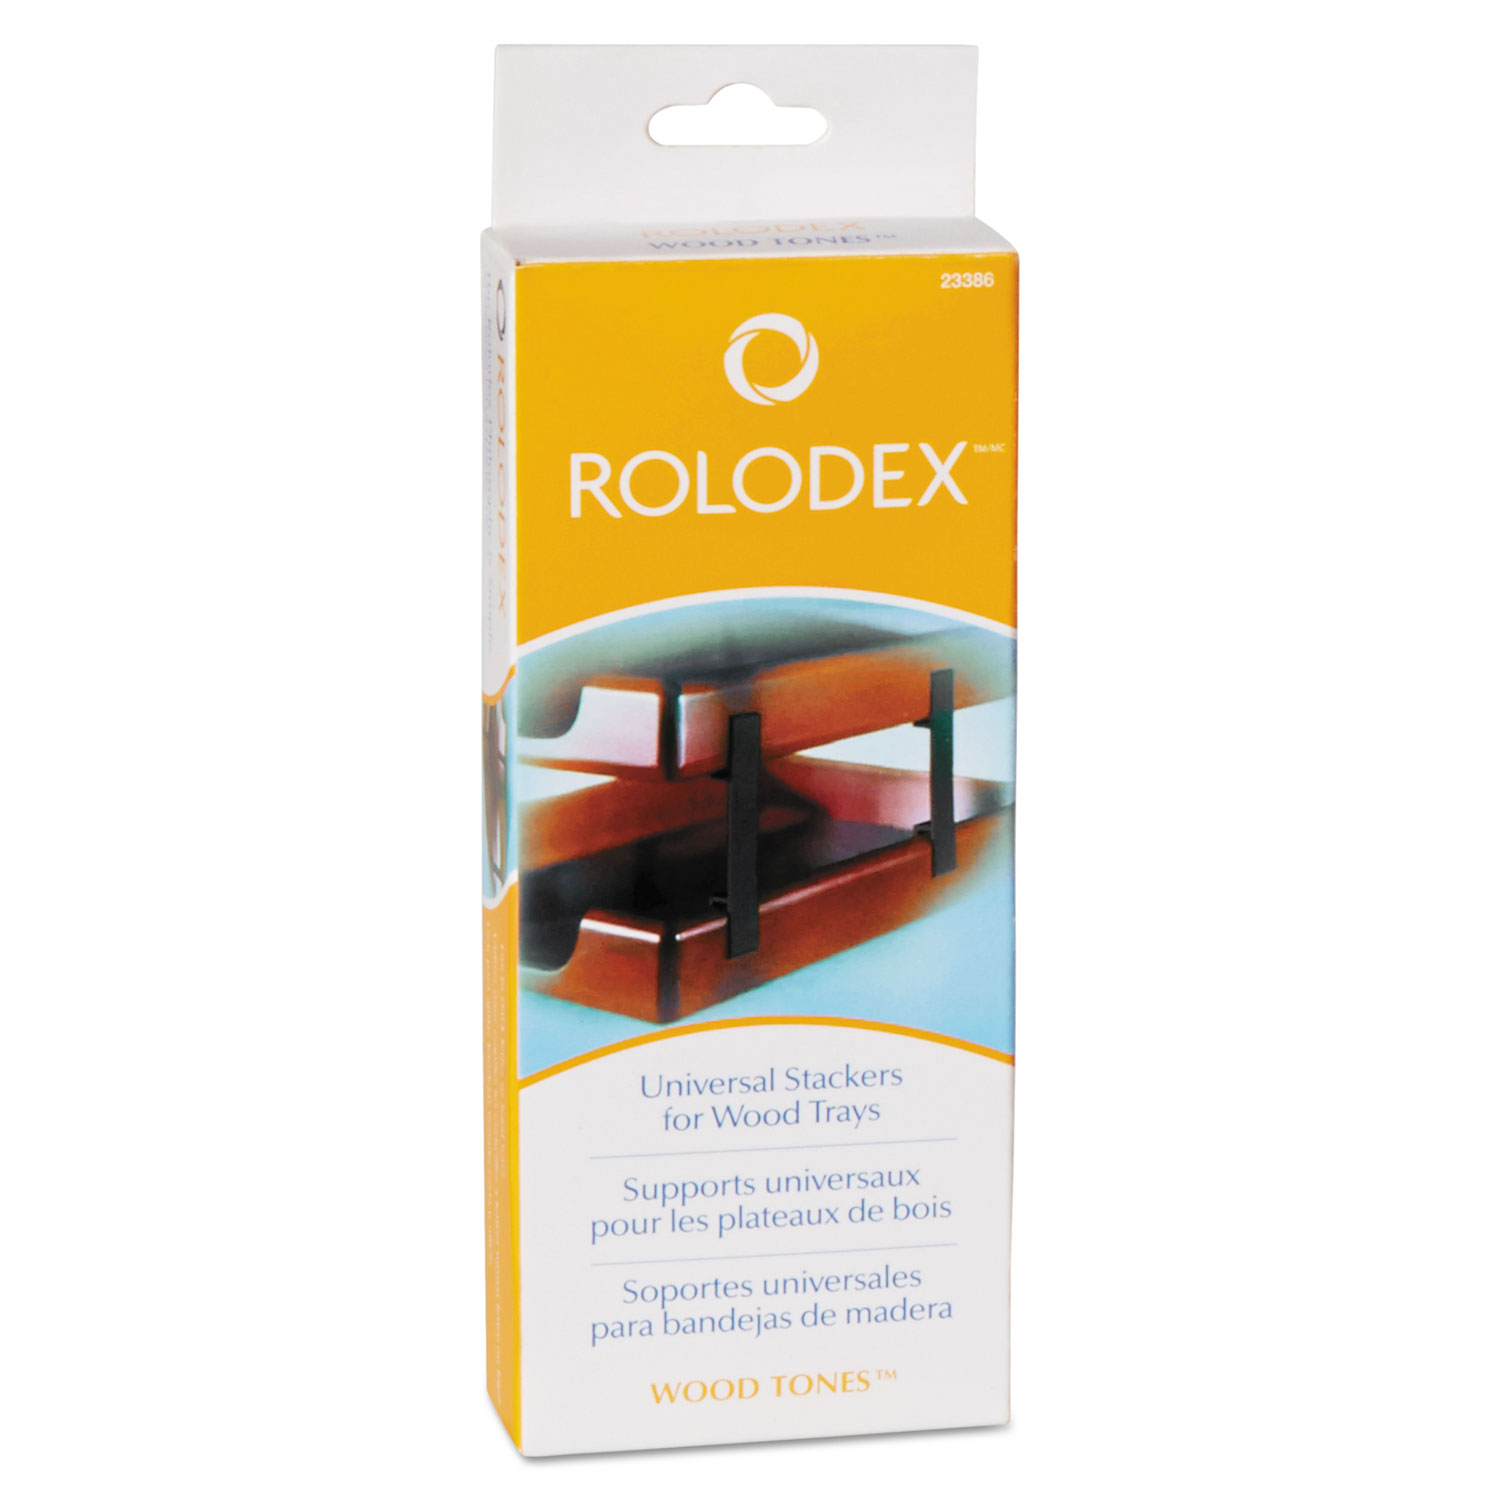  Rolodex 23386 Wood Tones Letter/Legal Desk Tray Stackers, 4 Tier, Metal, Black (ROL23386) 